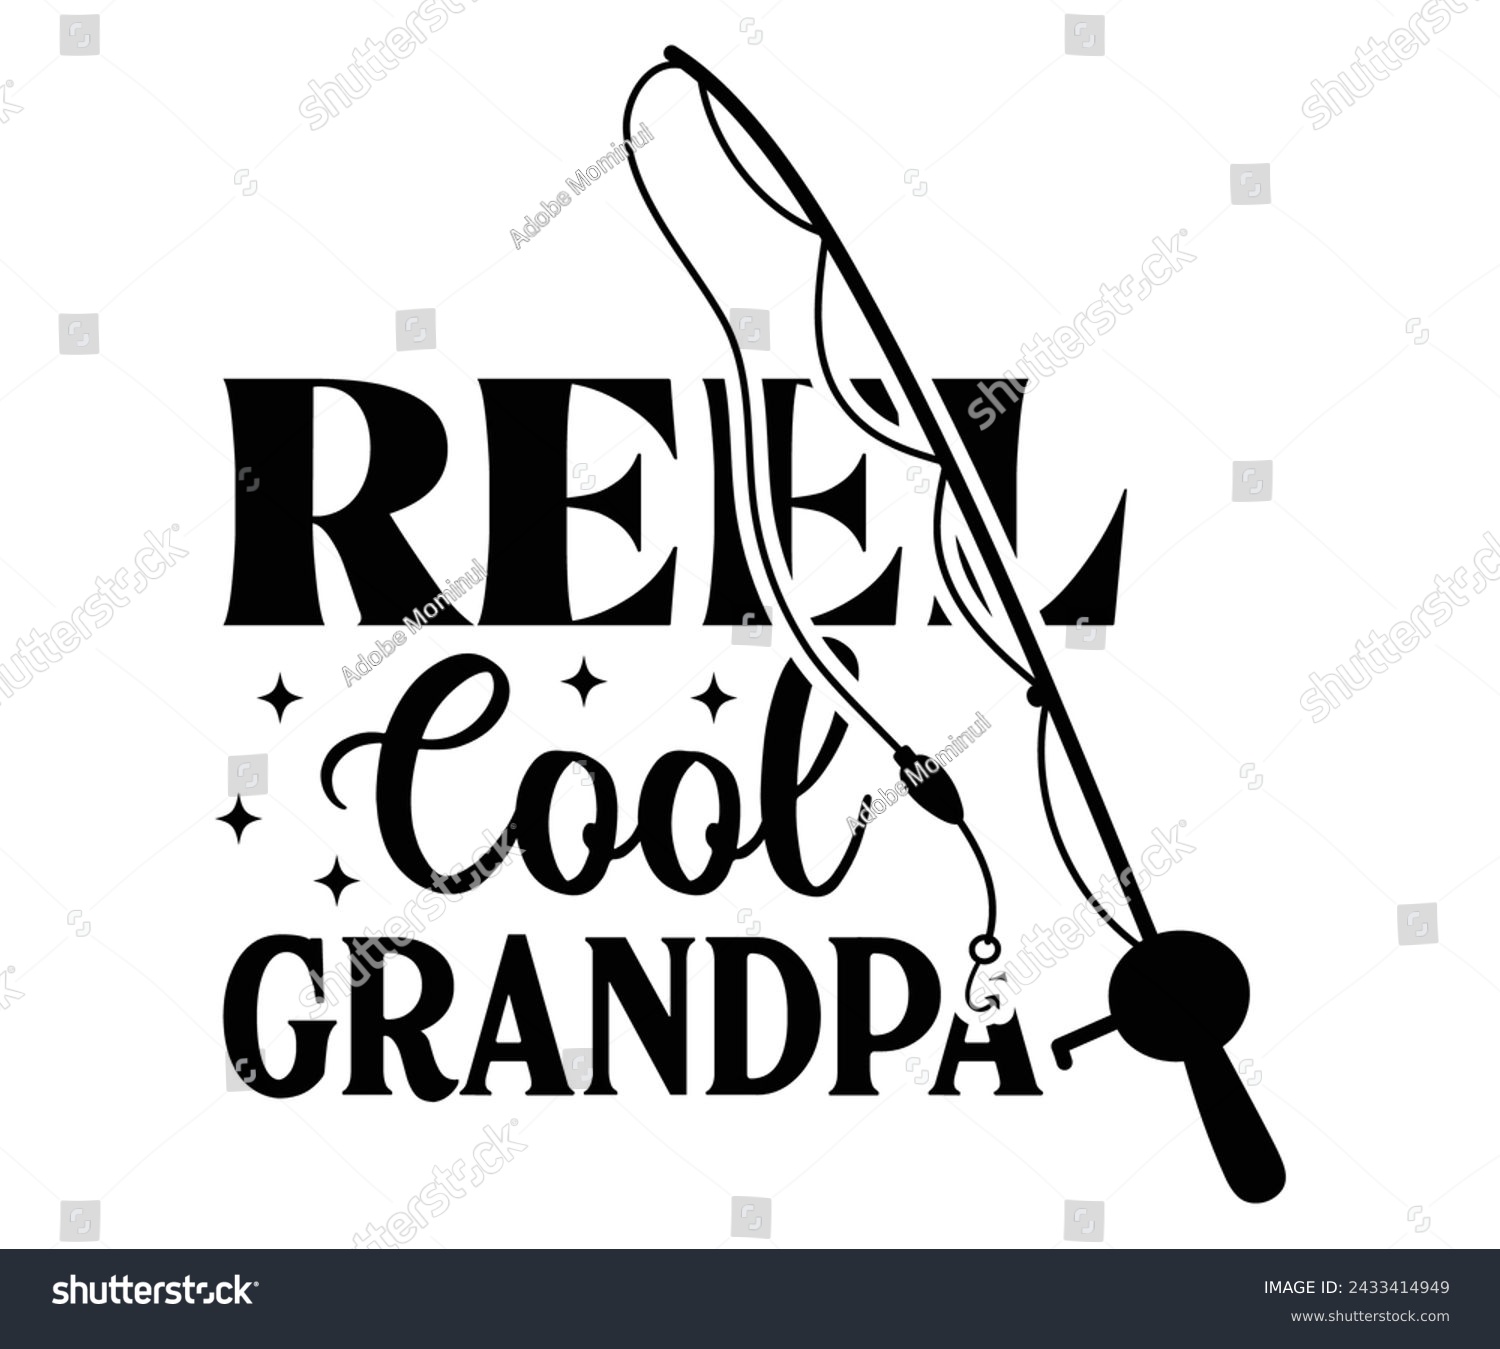 SVG of Reel Cool Grandpa,Fishing Svg,Fishing Quote Svg,Fisherman Svg,Fishing Rod,Dad Svg,Fishing Dad,Father's Day,Lucky Fishing Shirt,Cut File,Commercial Use svg